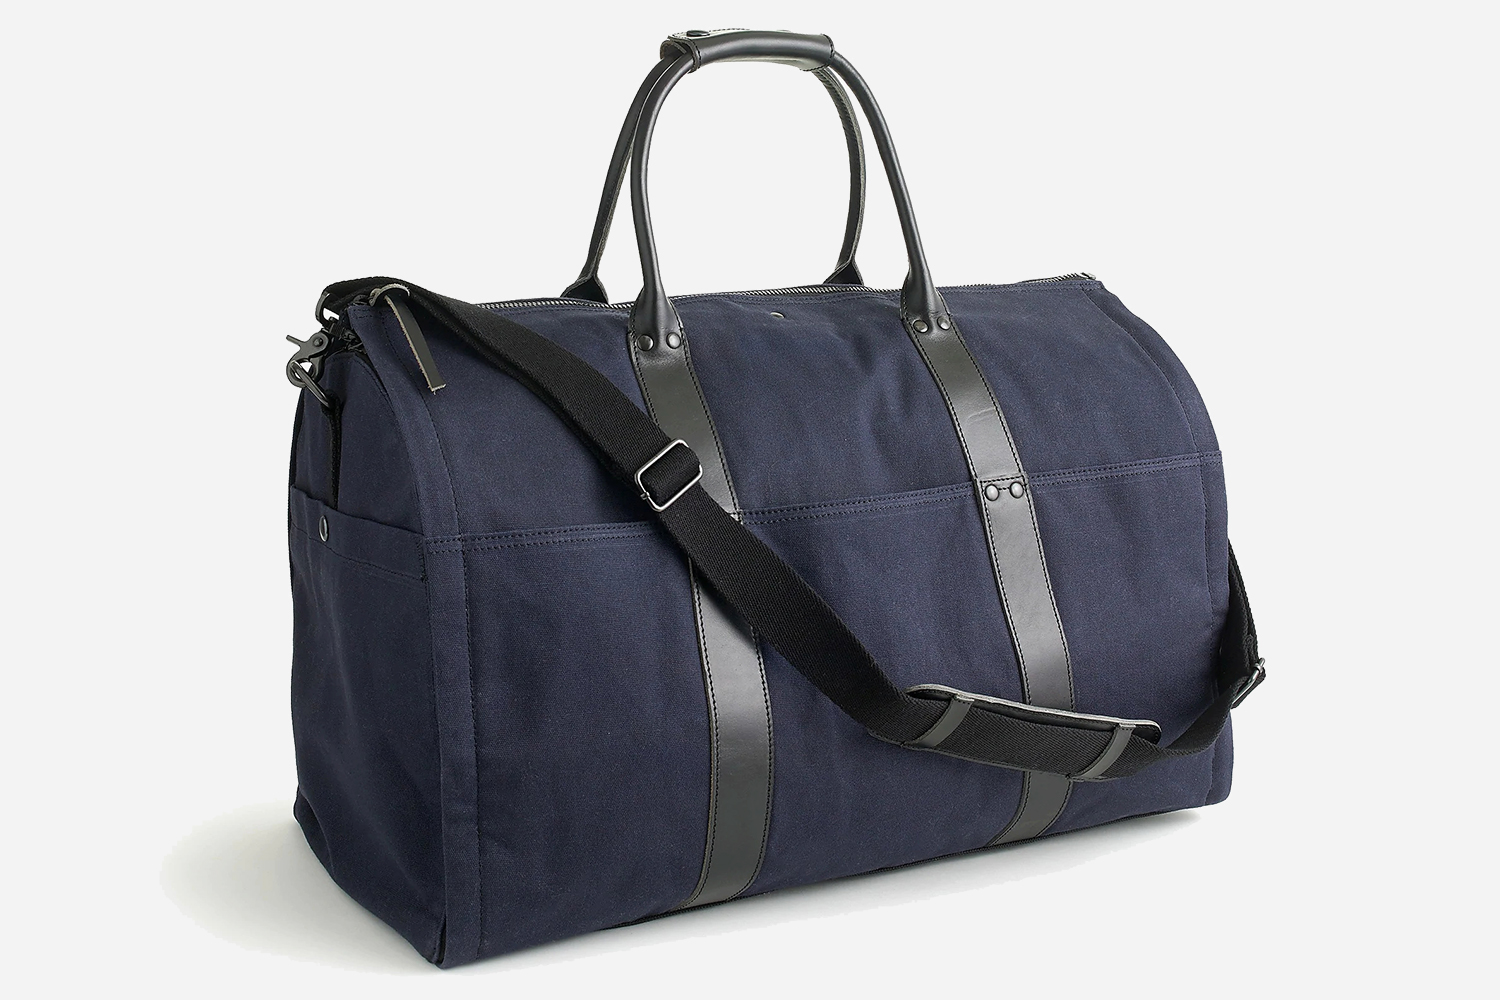 If You Travel With a Suit, Grab This J.Crew Bag for $100 Off - InsideHook